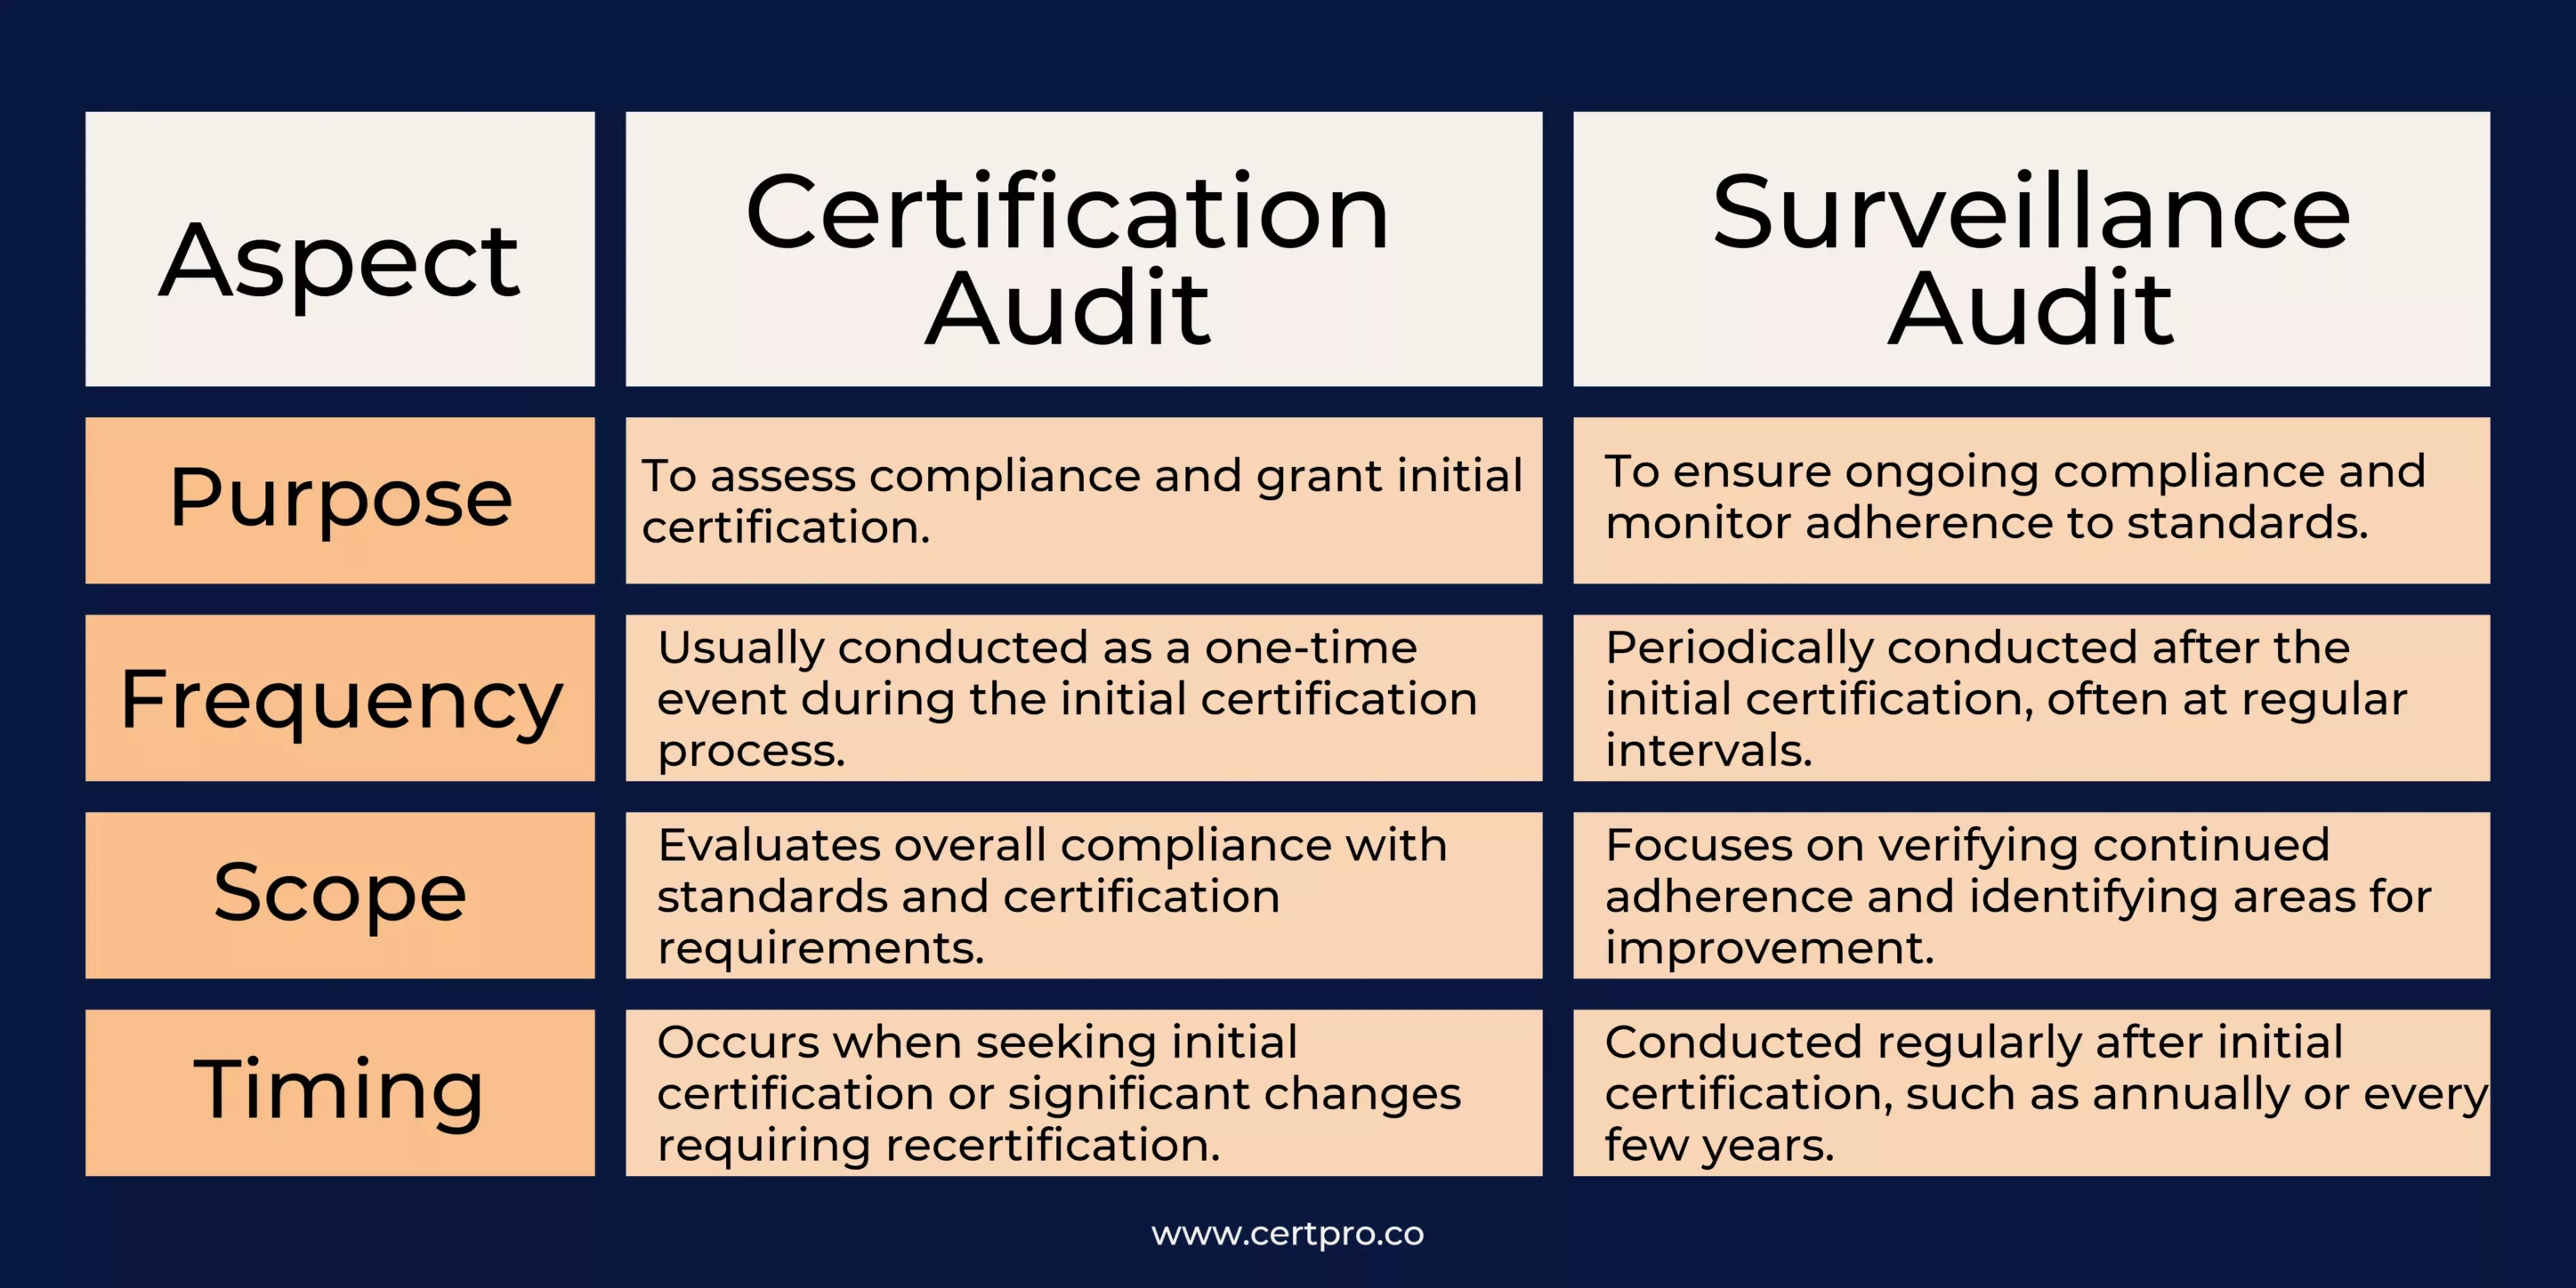 KEY DIFFERENCE BETWEEN A CERTIFICATION & SURVEILLANCE AUDITS